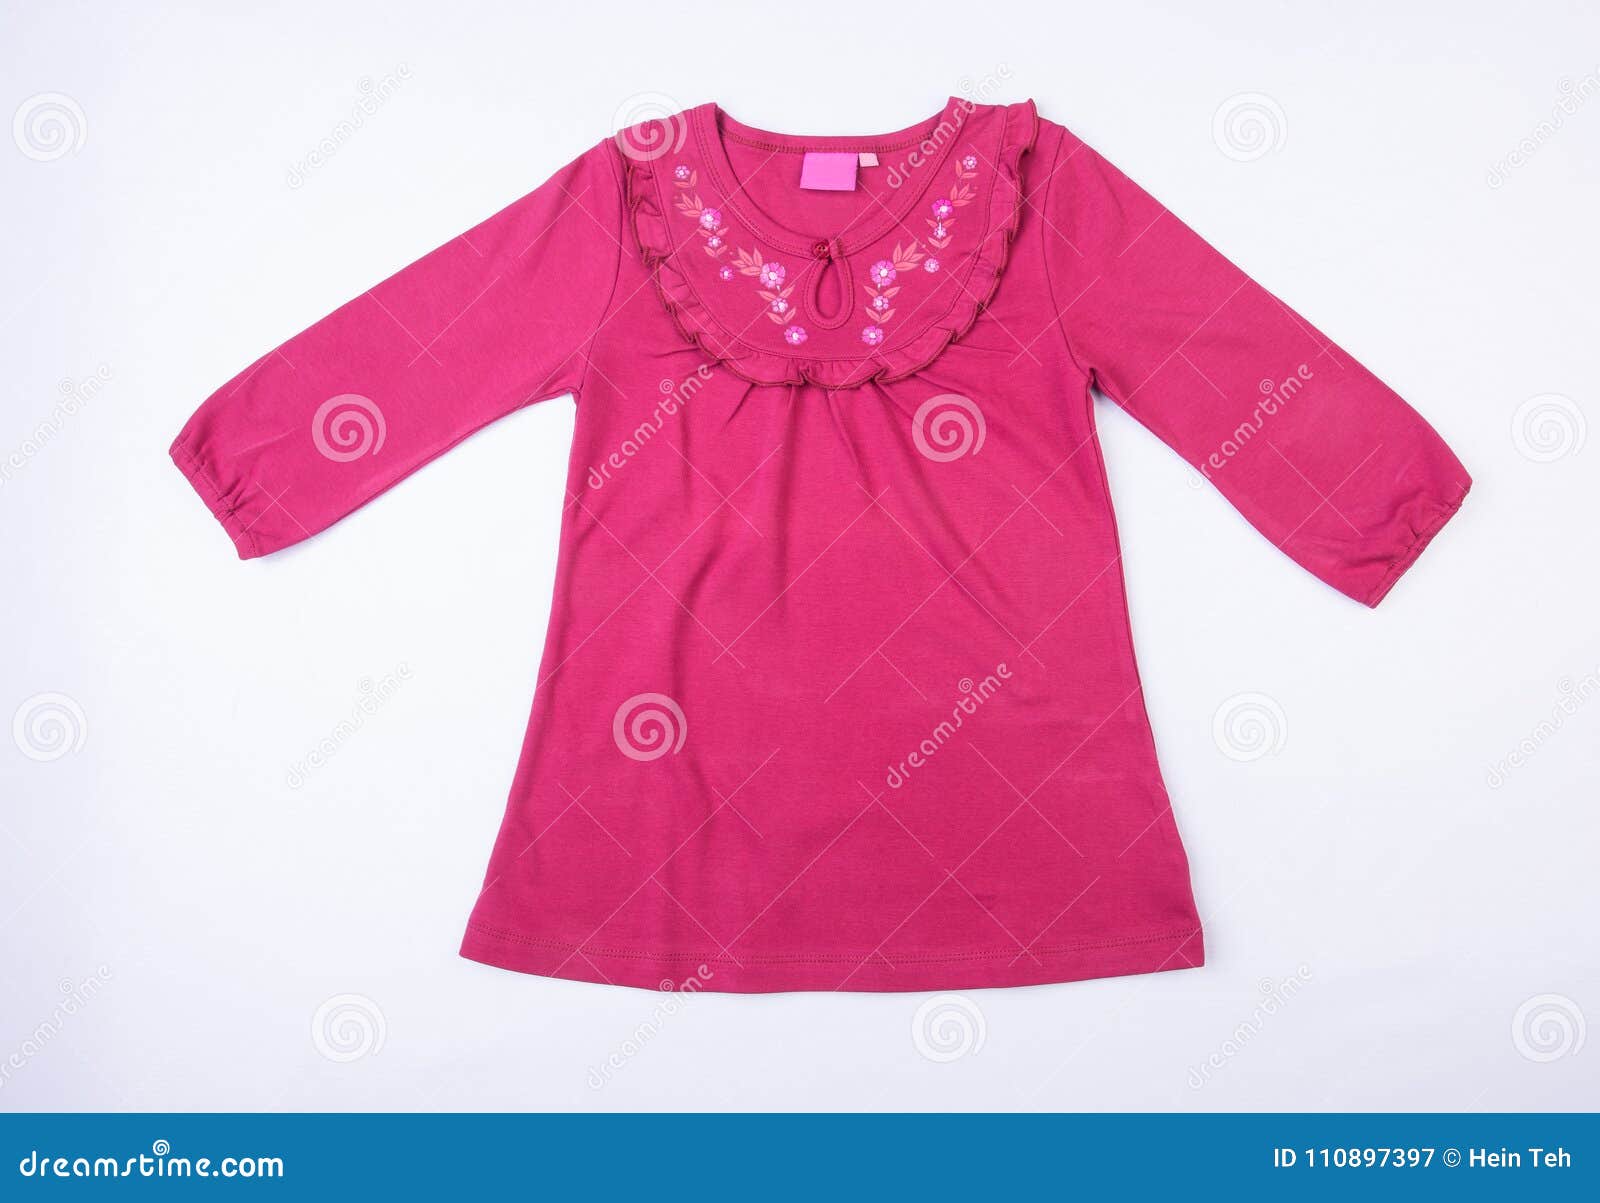 Shirt or Children S Wear Girl on a Background. Stock Image - Image of ...